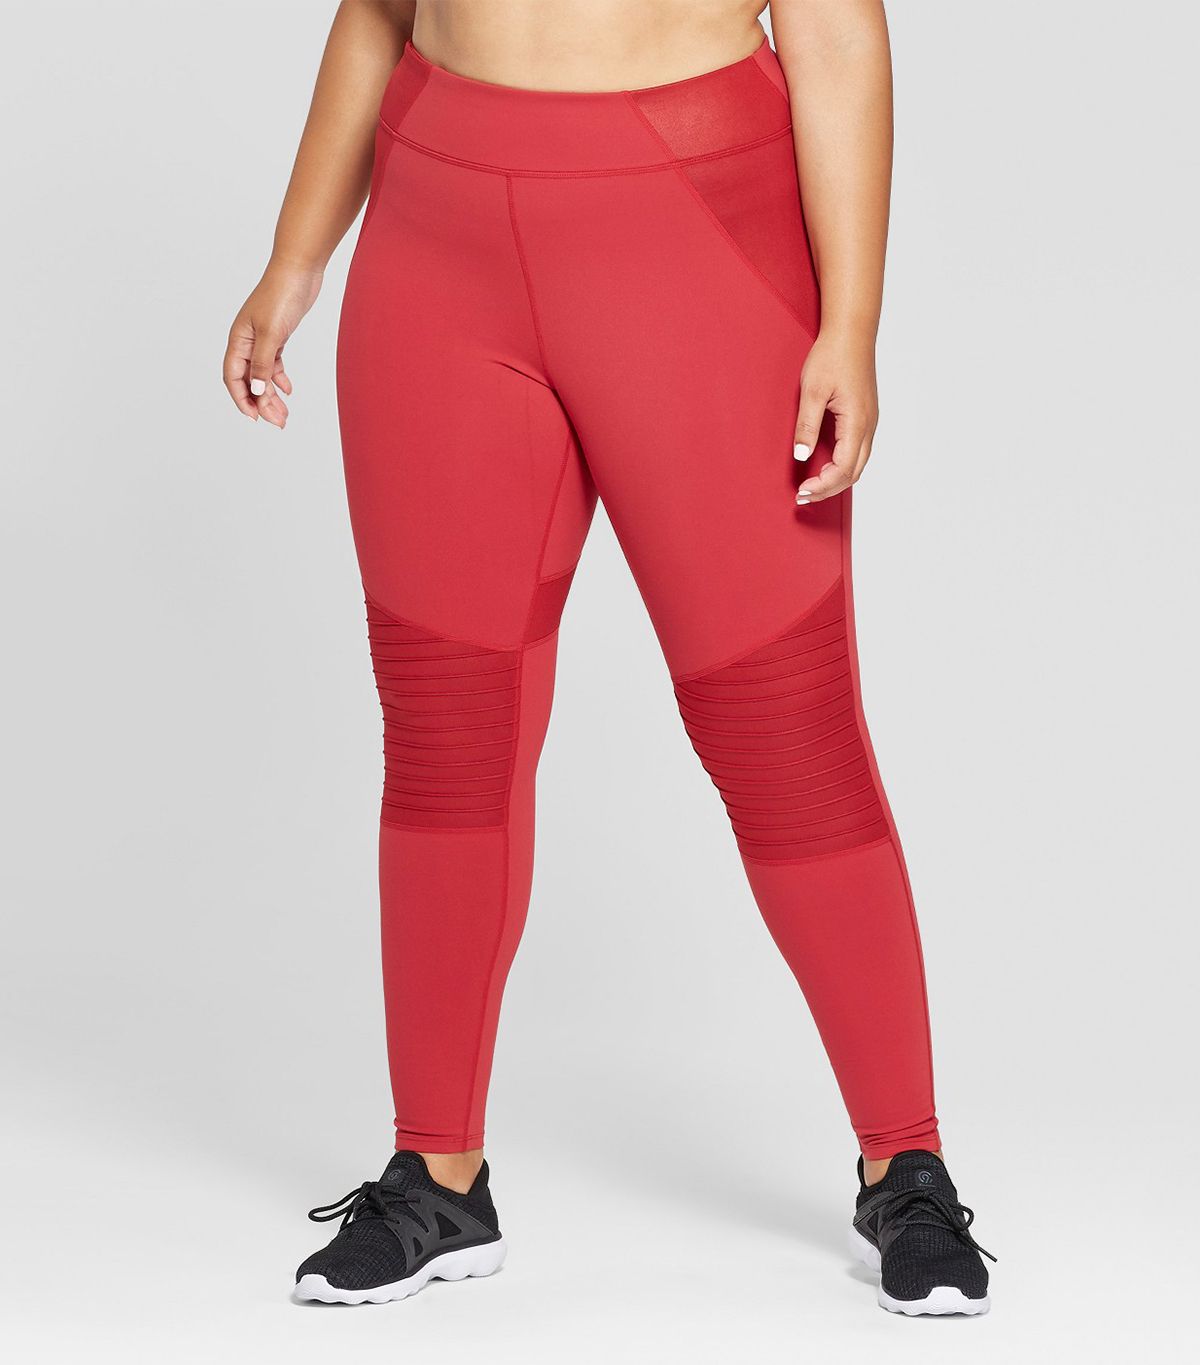 The 8 Best Yoga Pant Brands Shoppers Give 5 Stars | Who What Wear